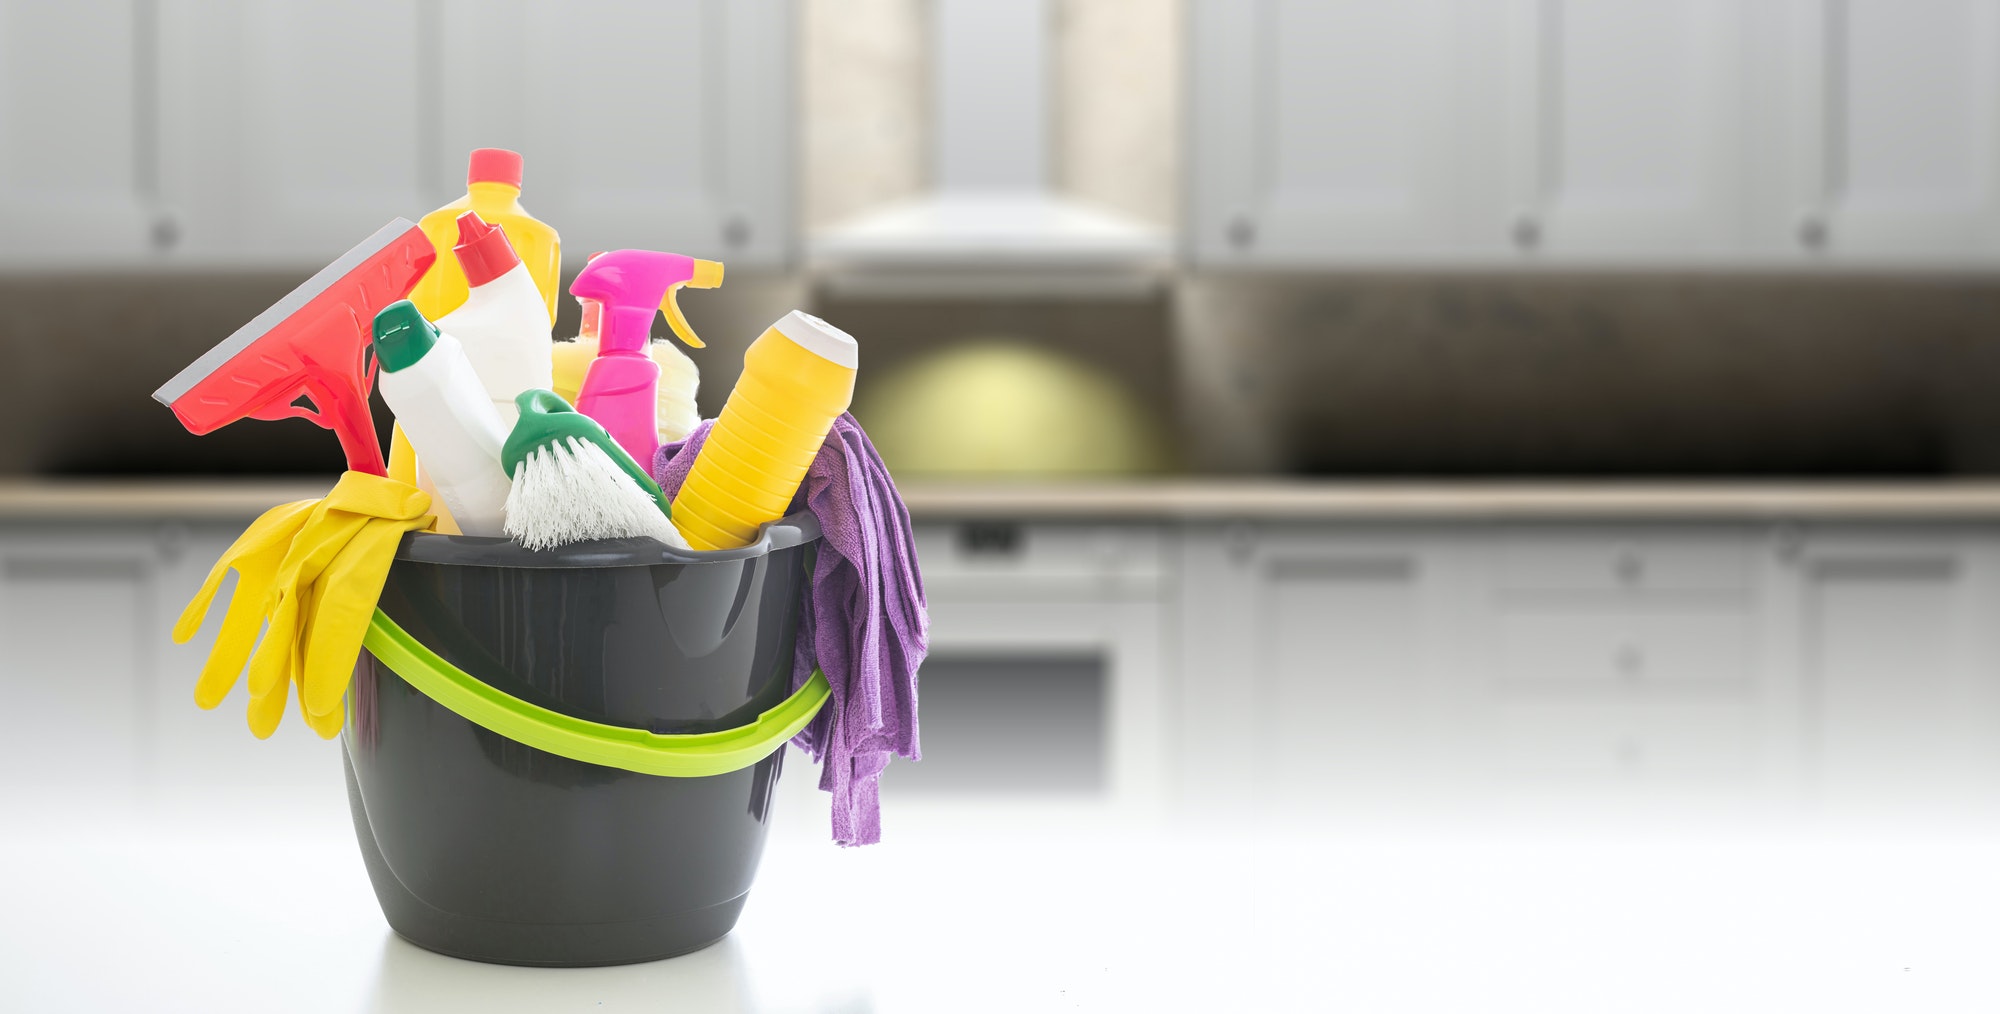 Cleaning supplies in a bucket against blur kitchen cabinets background.